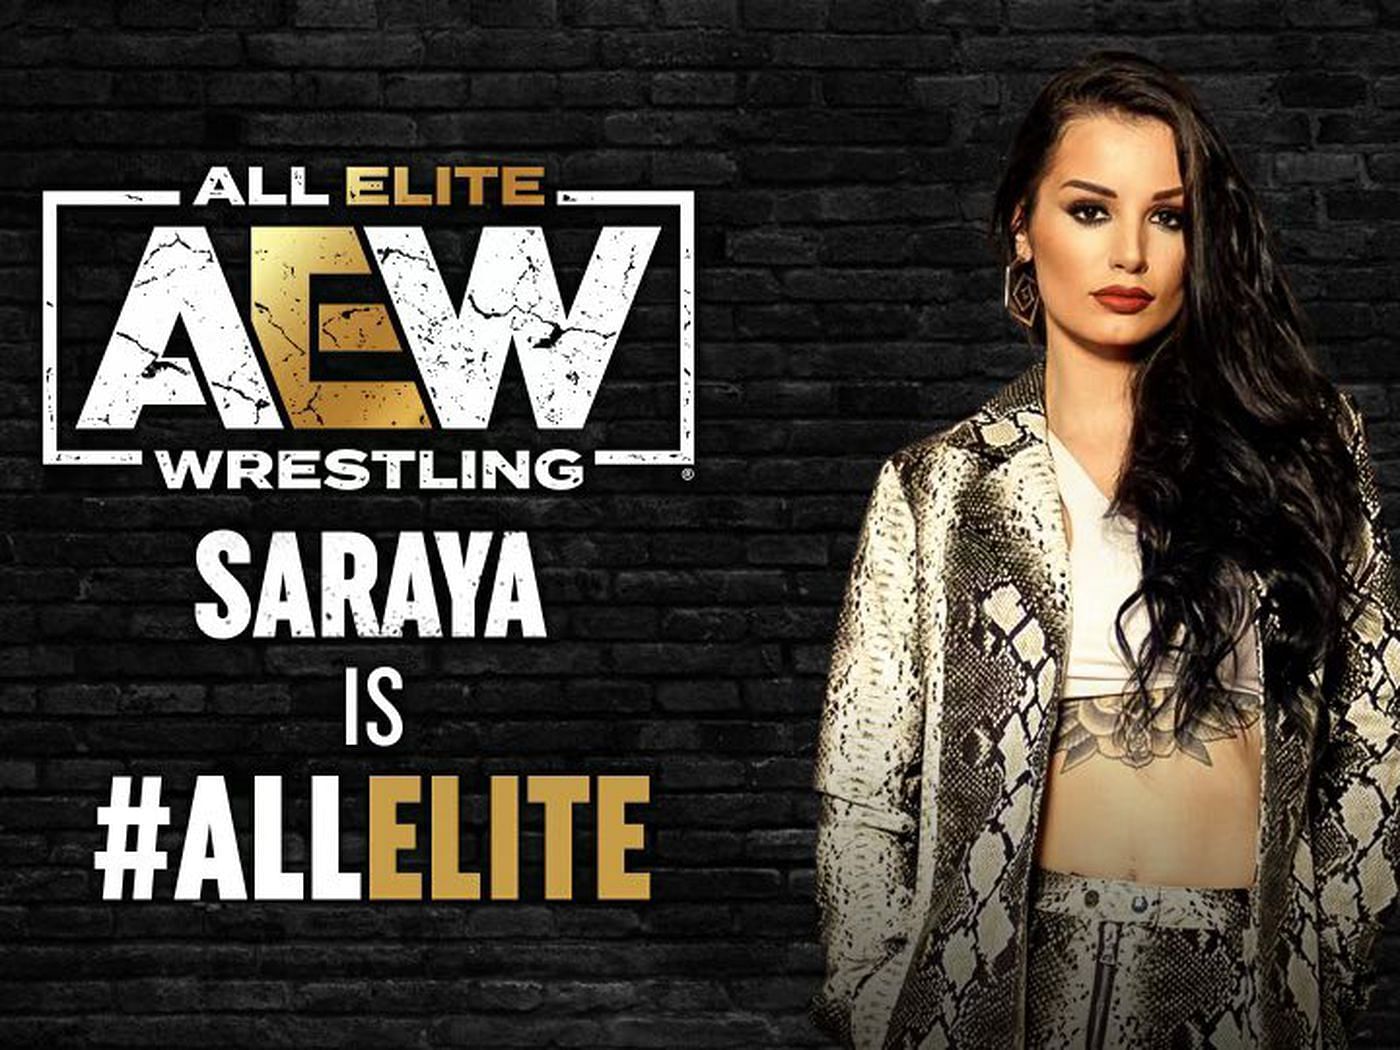 It has officially happened. Saraya is a part of the AEW roster.